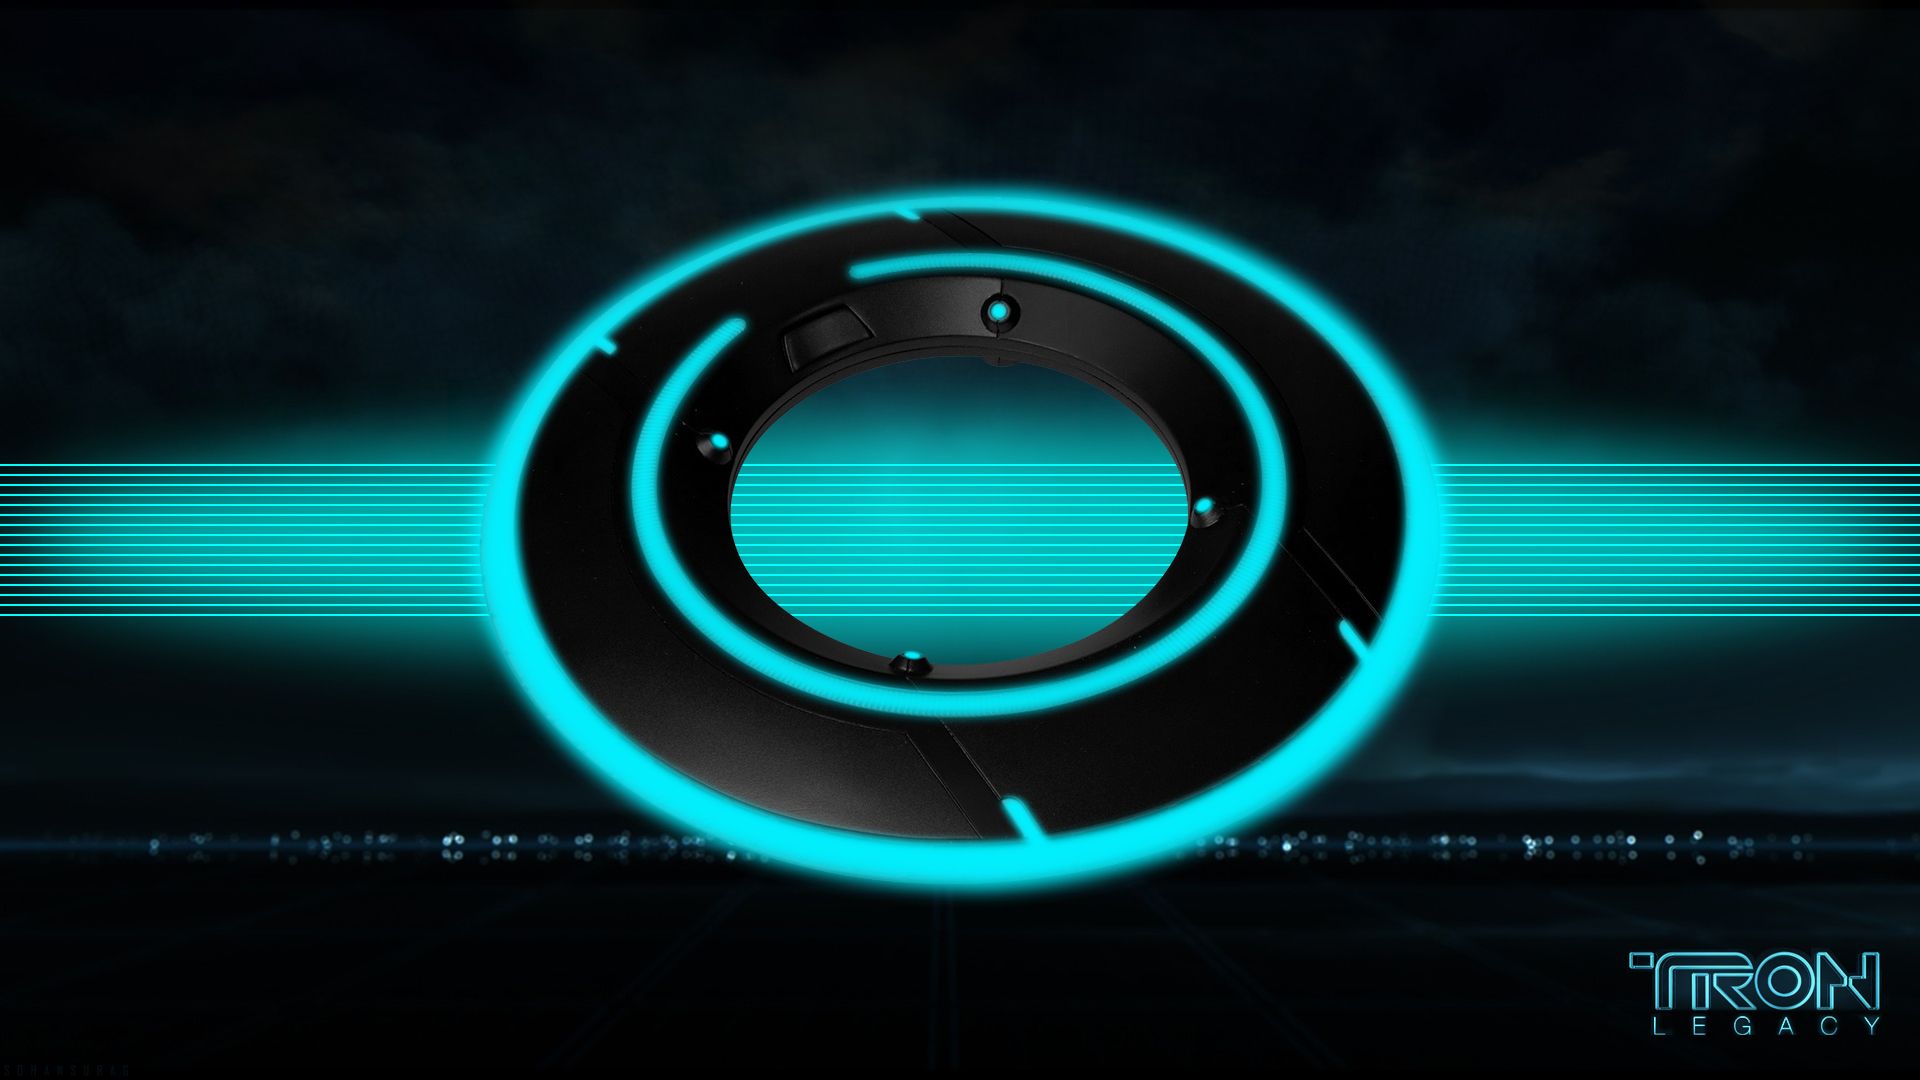 Tron Legacy Wallpapers Megapack Awesome Backgrounds